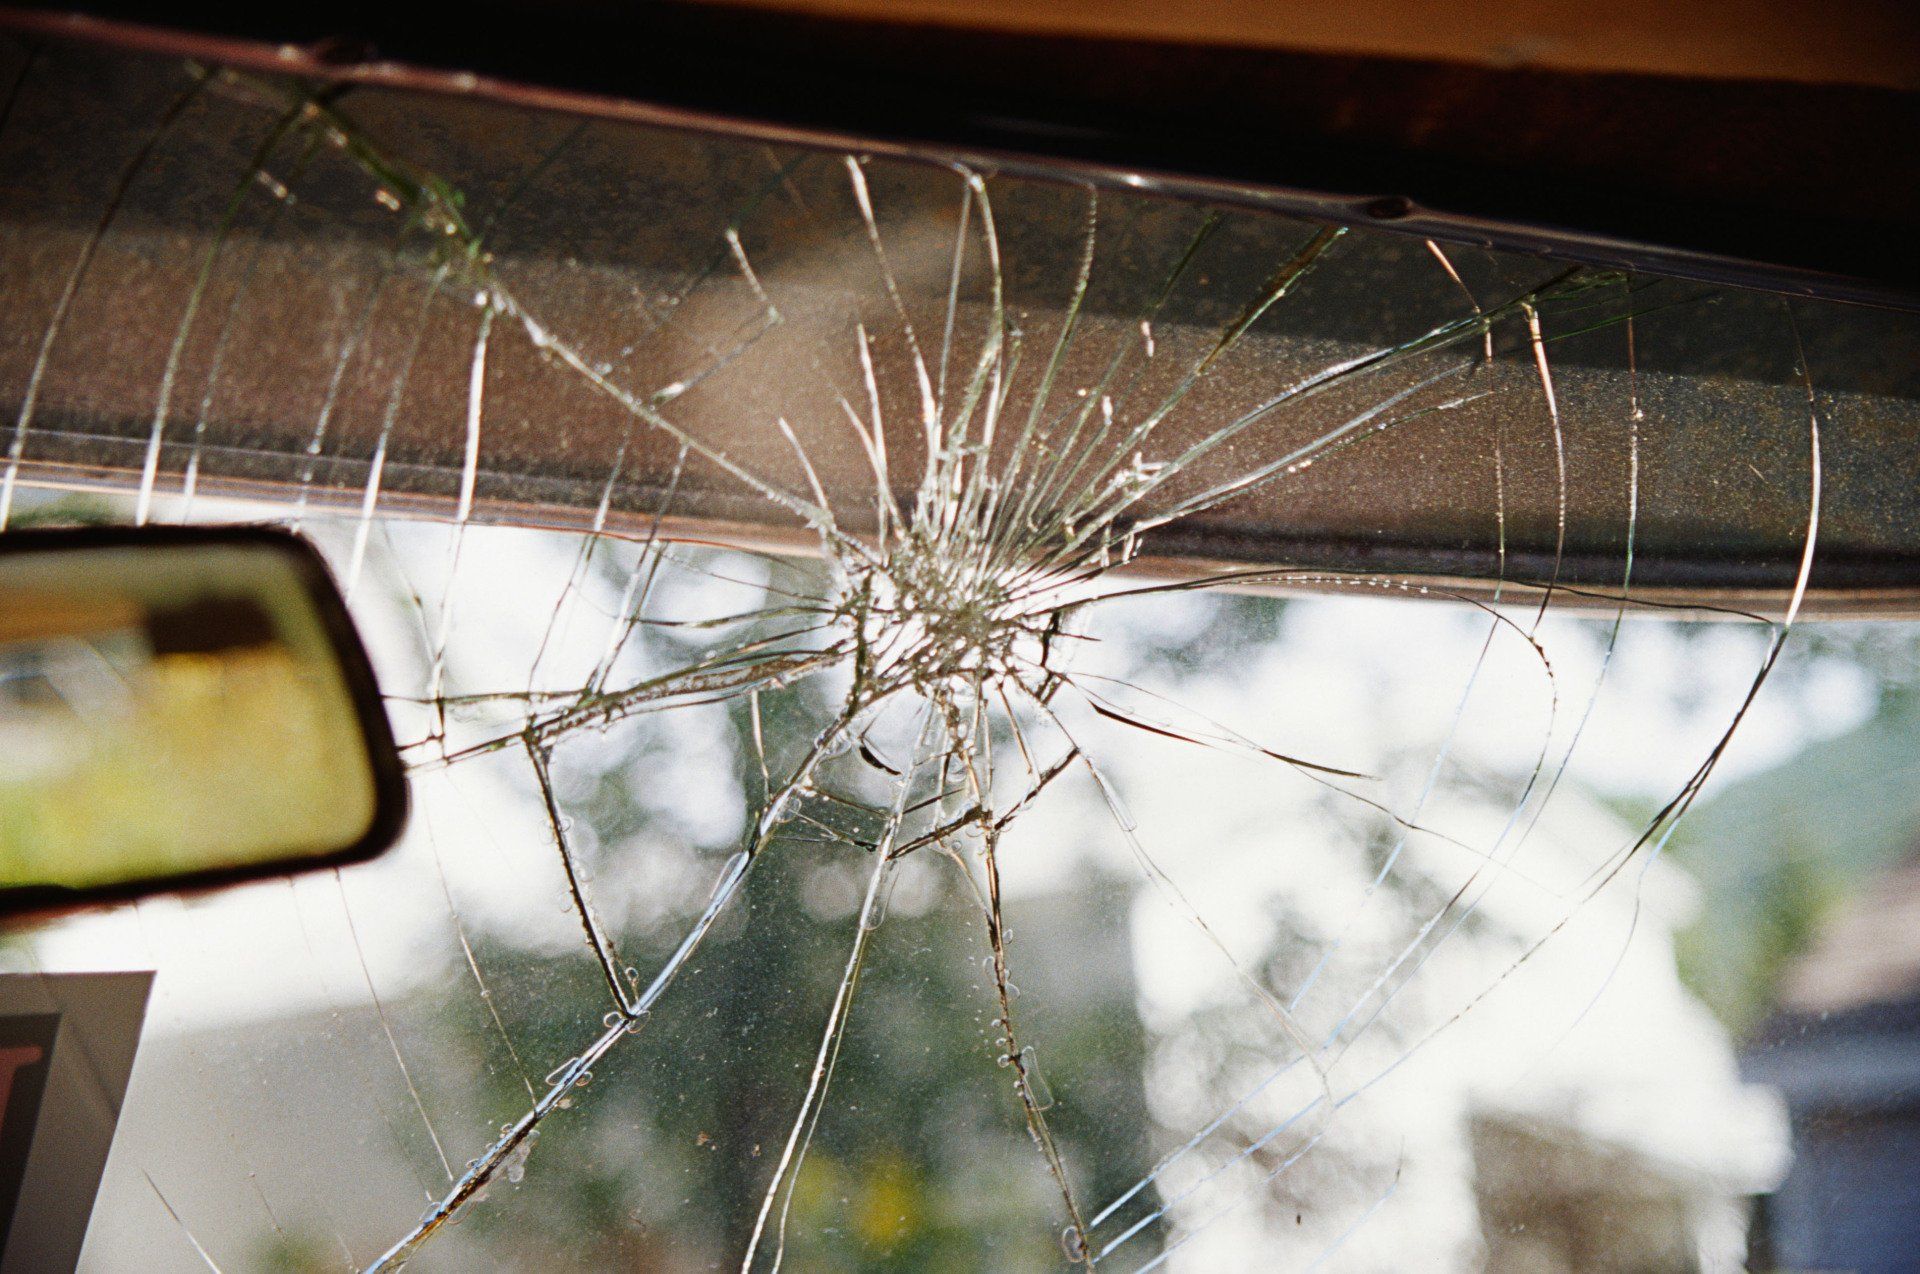 affordable auto glass service